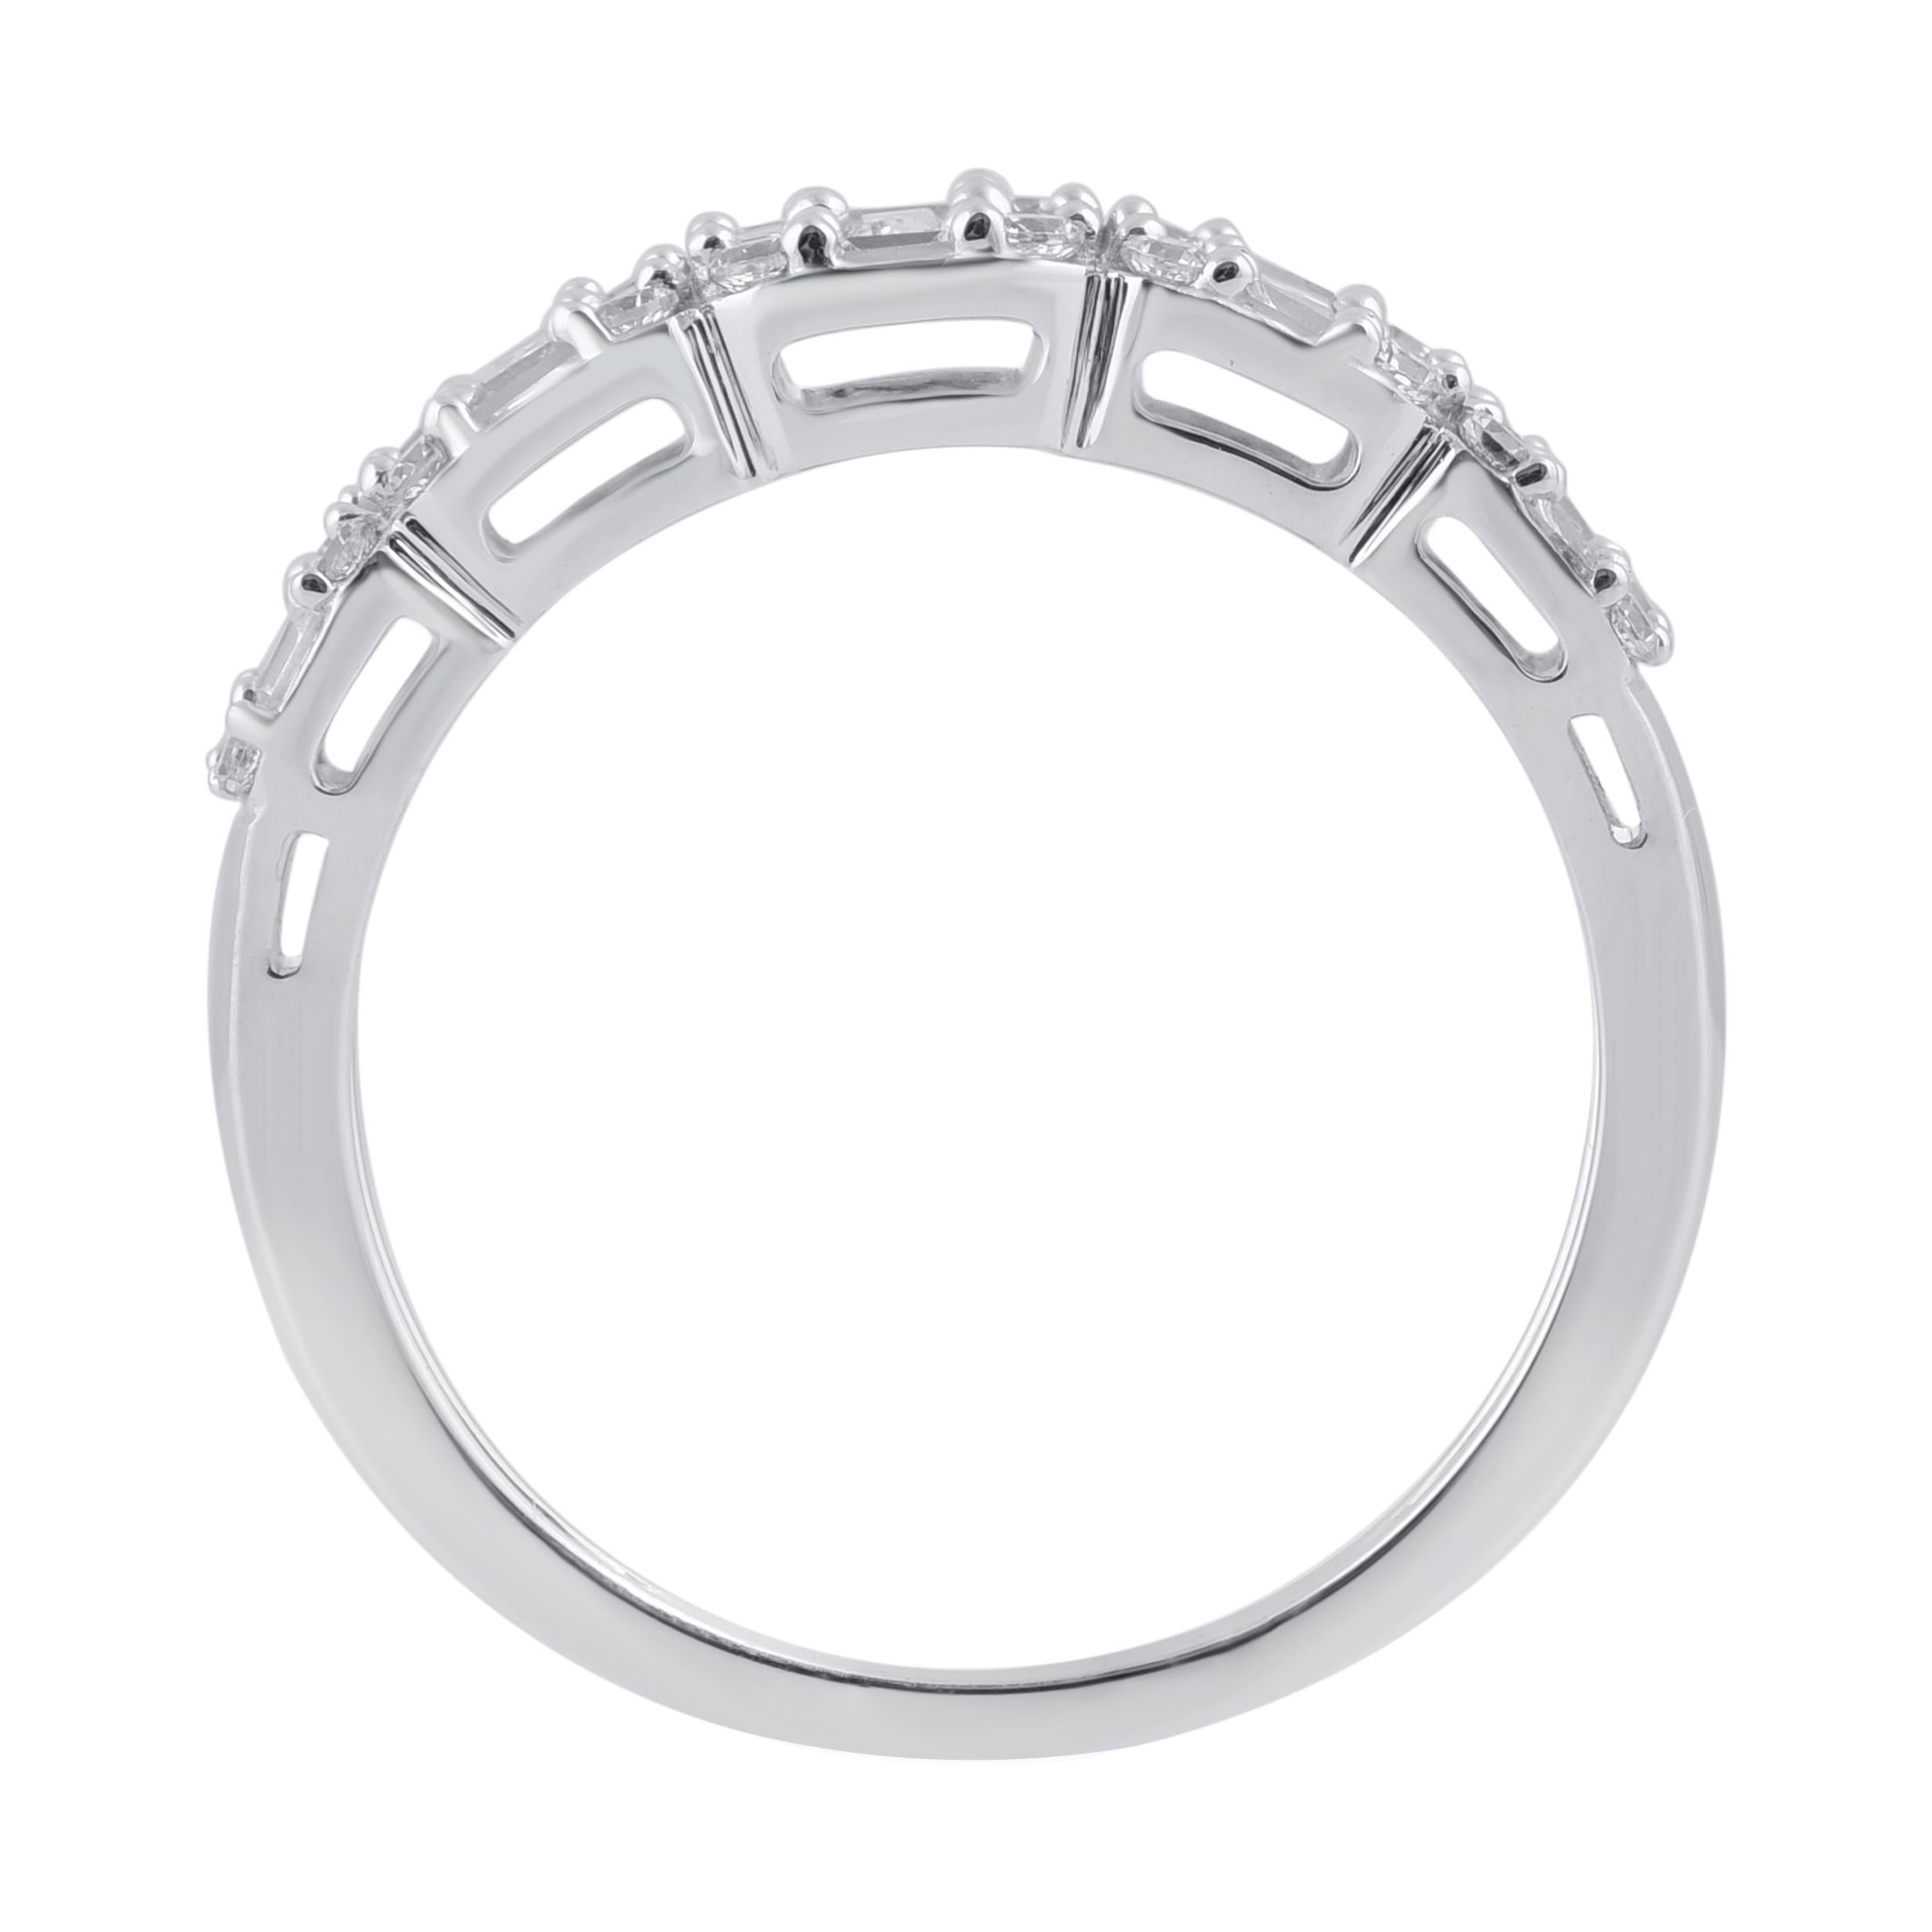 Modern and mesmerizing, these wedding band diamond ring are an eye catchy look for any occasion. Embedded with 45 brilliant cut round diamonds and baguette diamonds set in prong setting and crafted in 14 karat white gold. Captivating with 1.0 carat